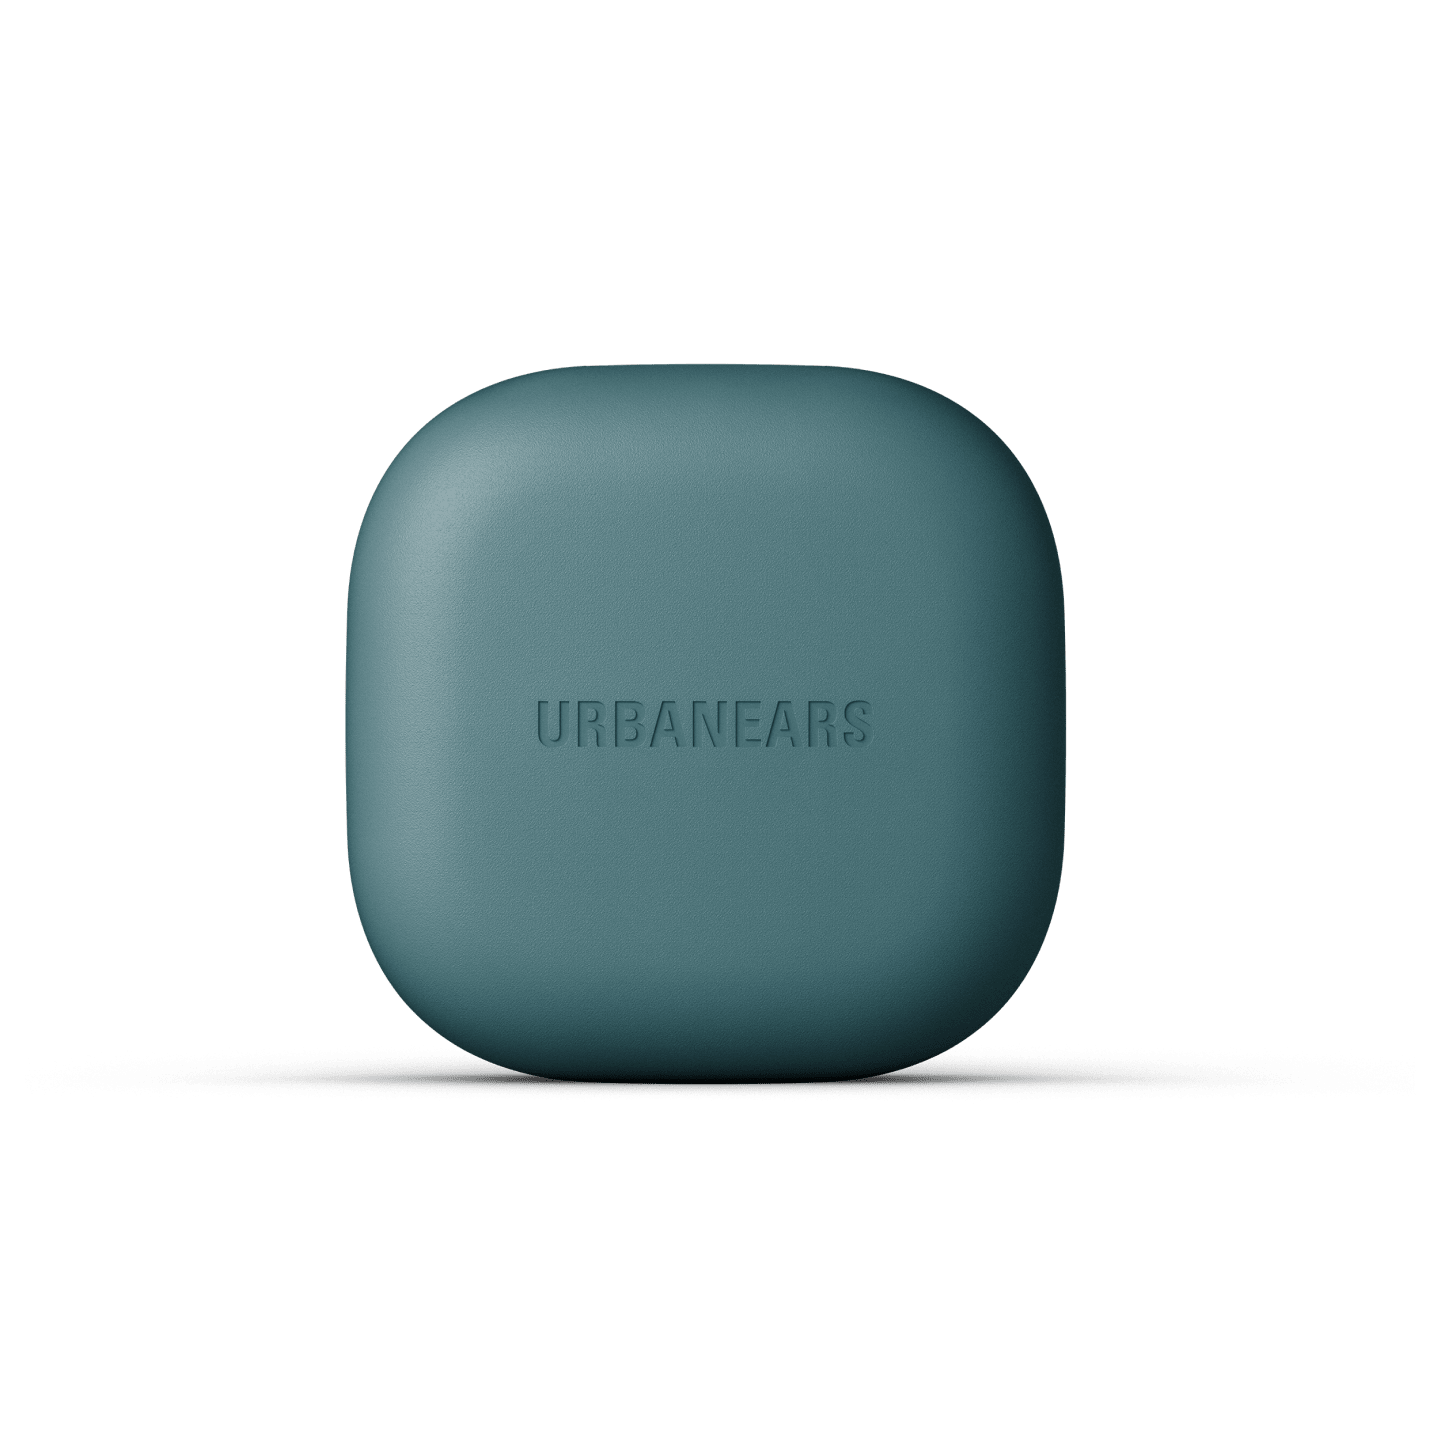 Urbanears Alby Charging Case Teal Green Image 6